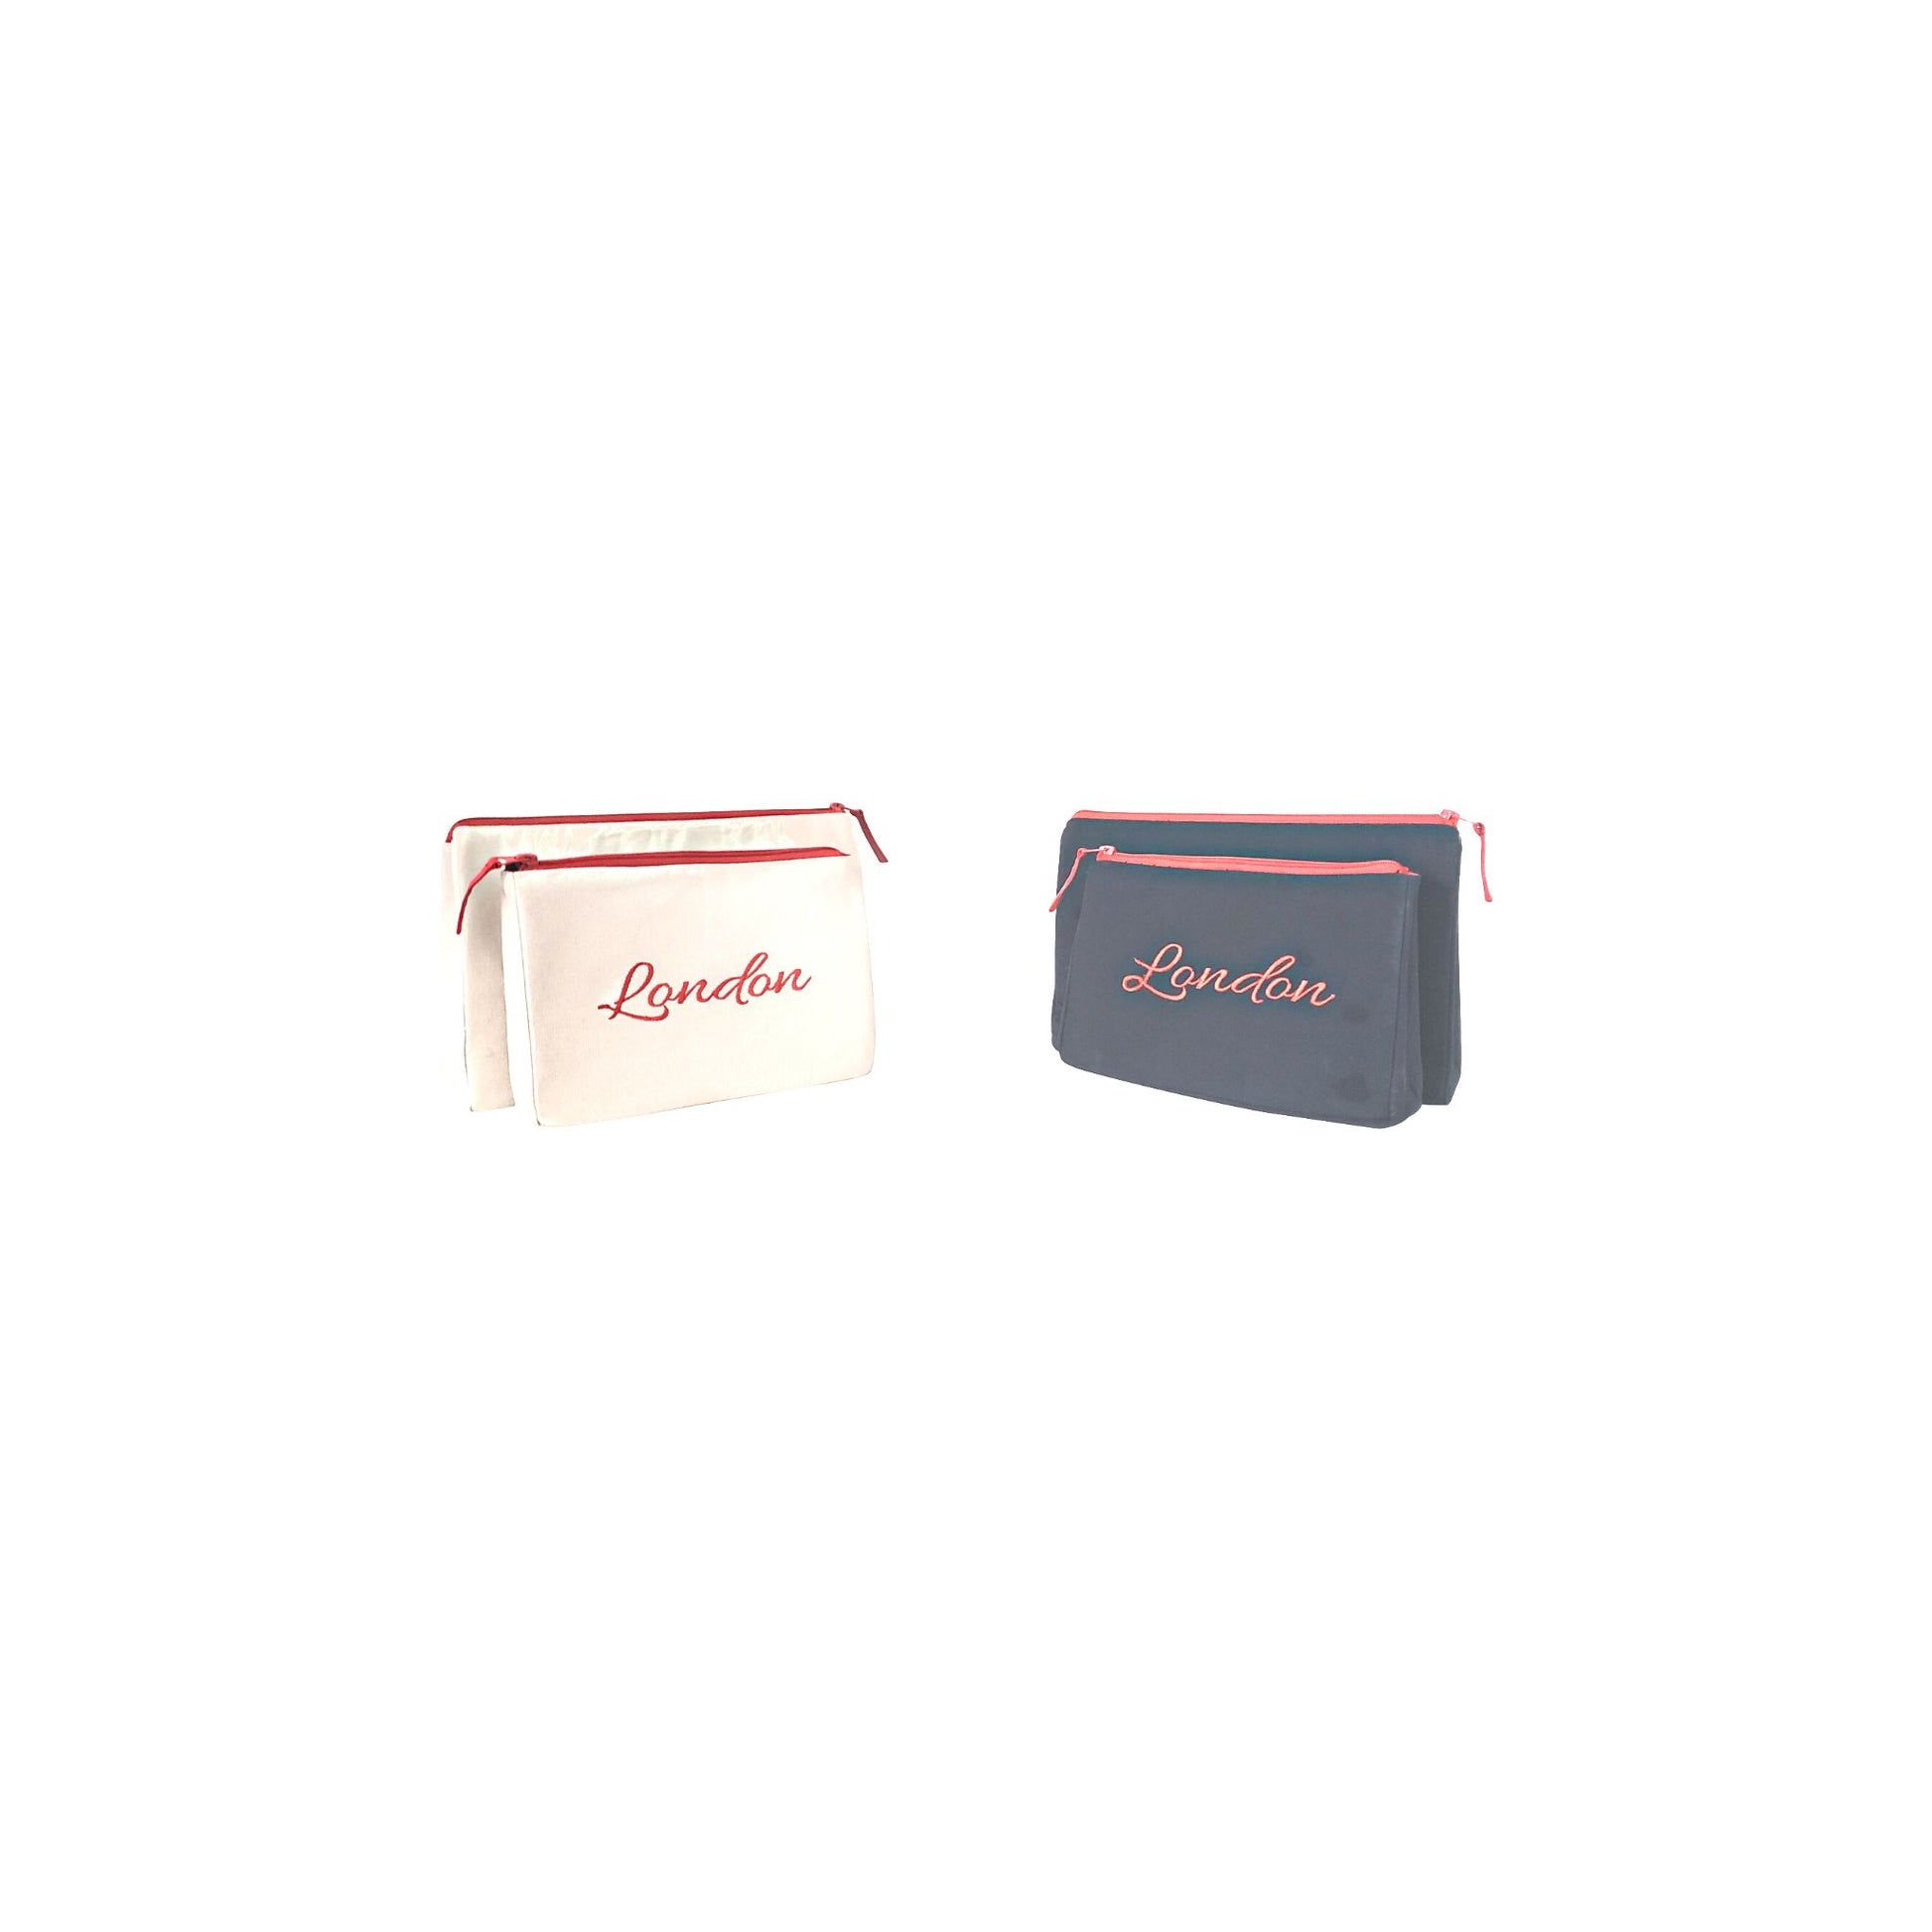 London Makeup Bag Sets in Day and Night